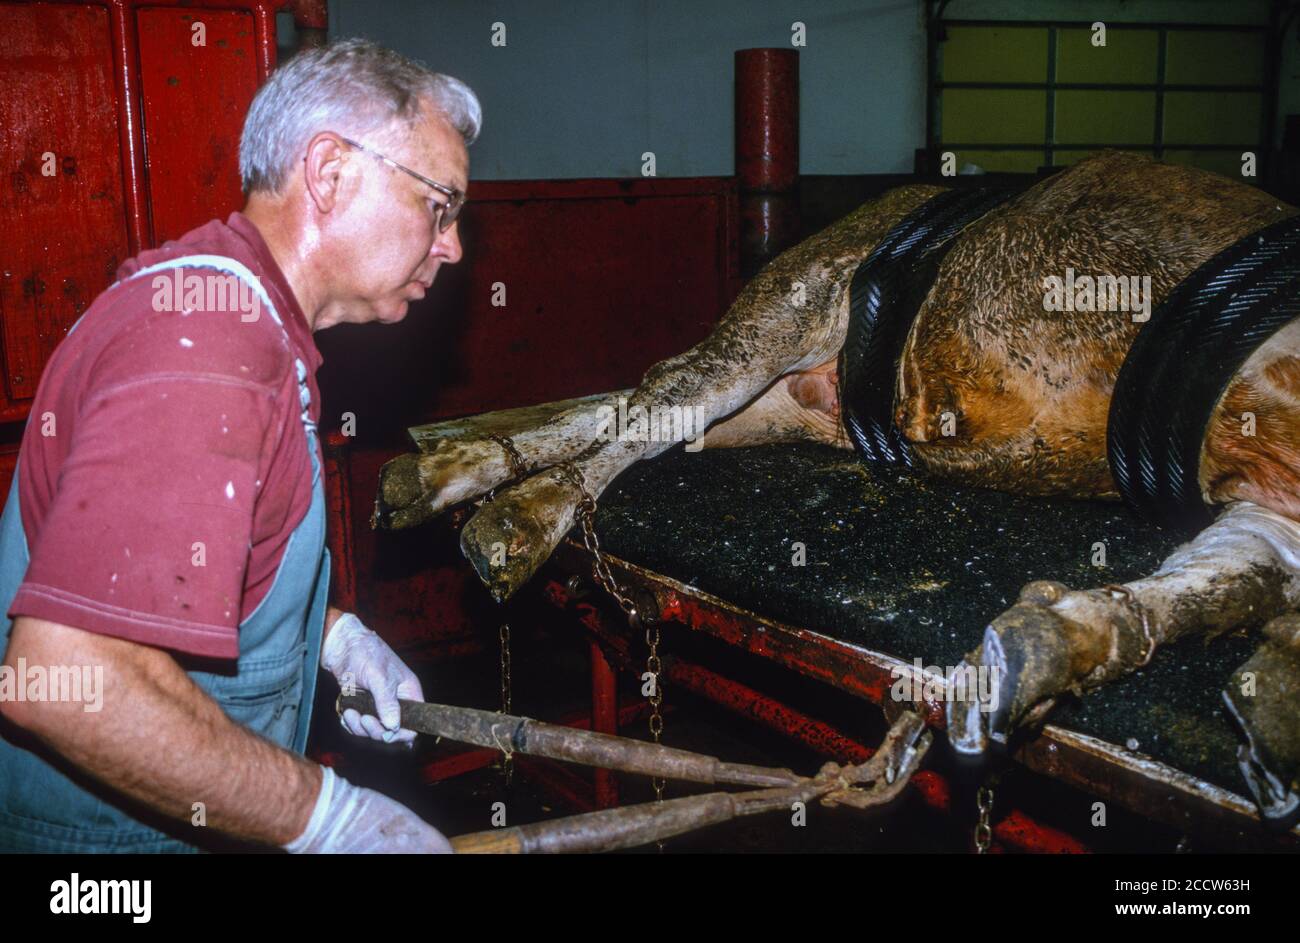 Large-animal Veterinarian at Work:  Trimming Hooves, Cow on Operating Table.  Dyersville, Iowa, USA. MR. Stock Photo